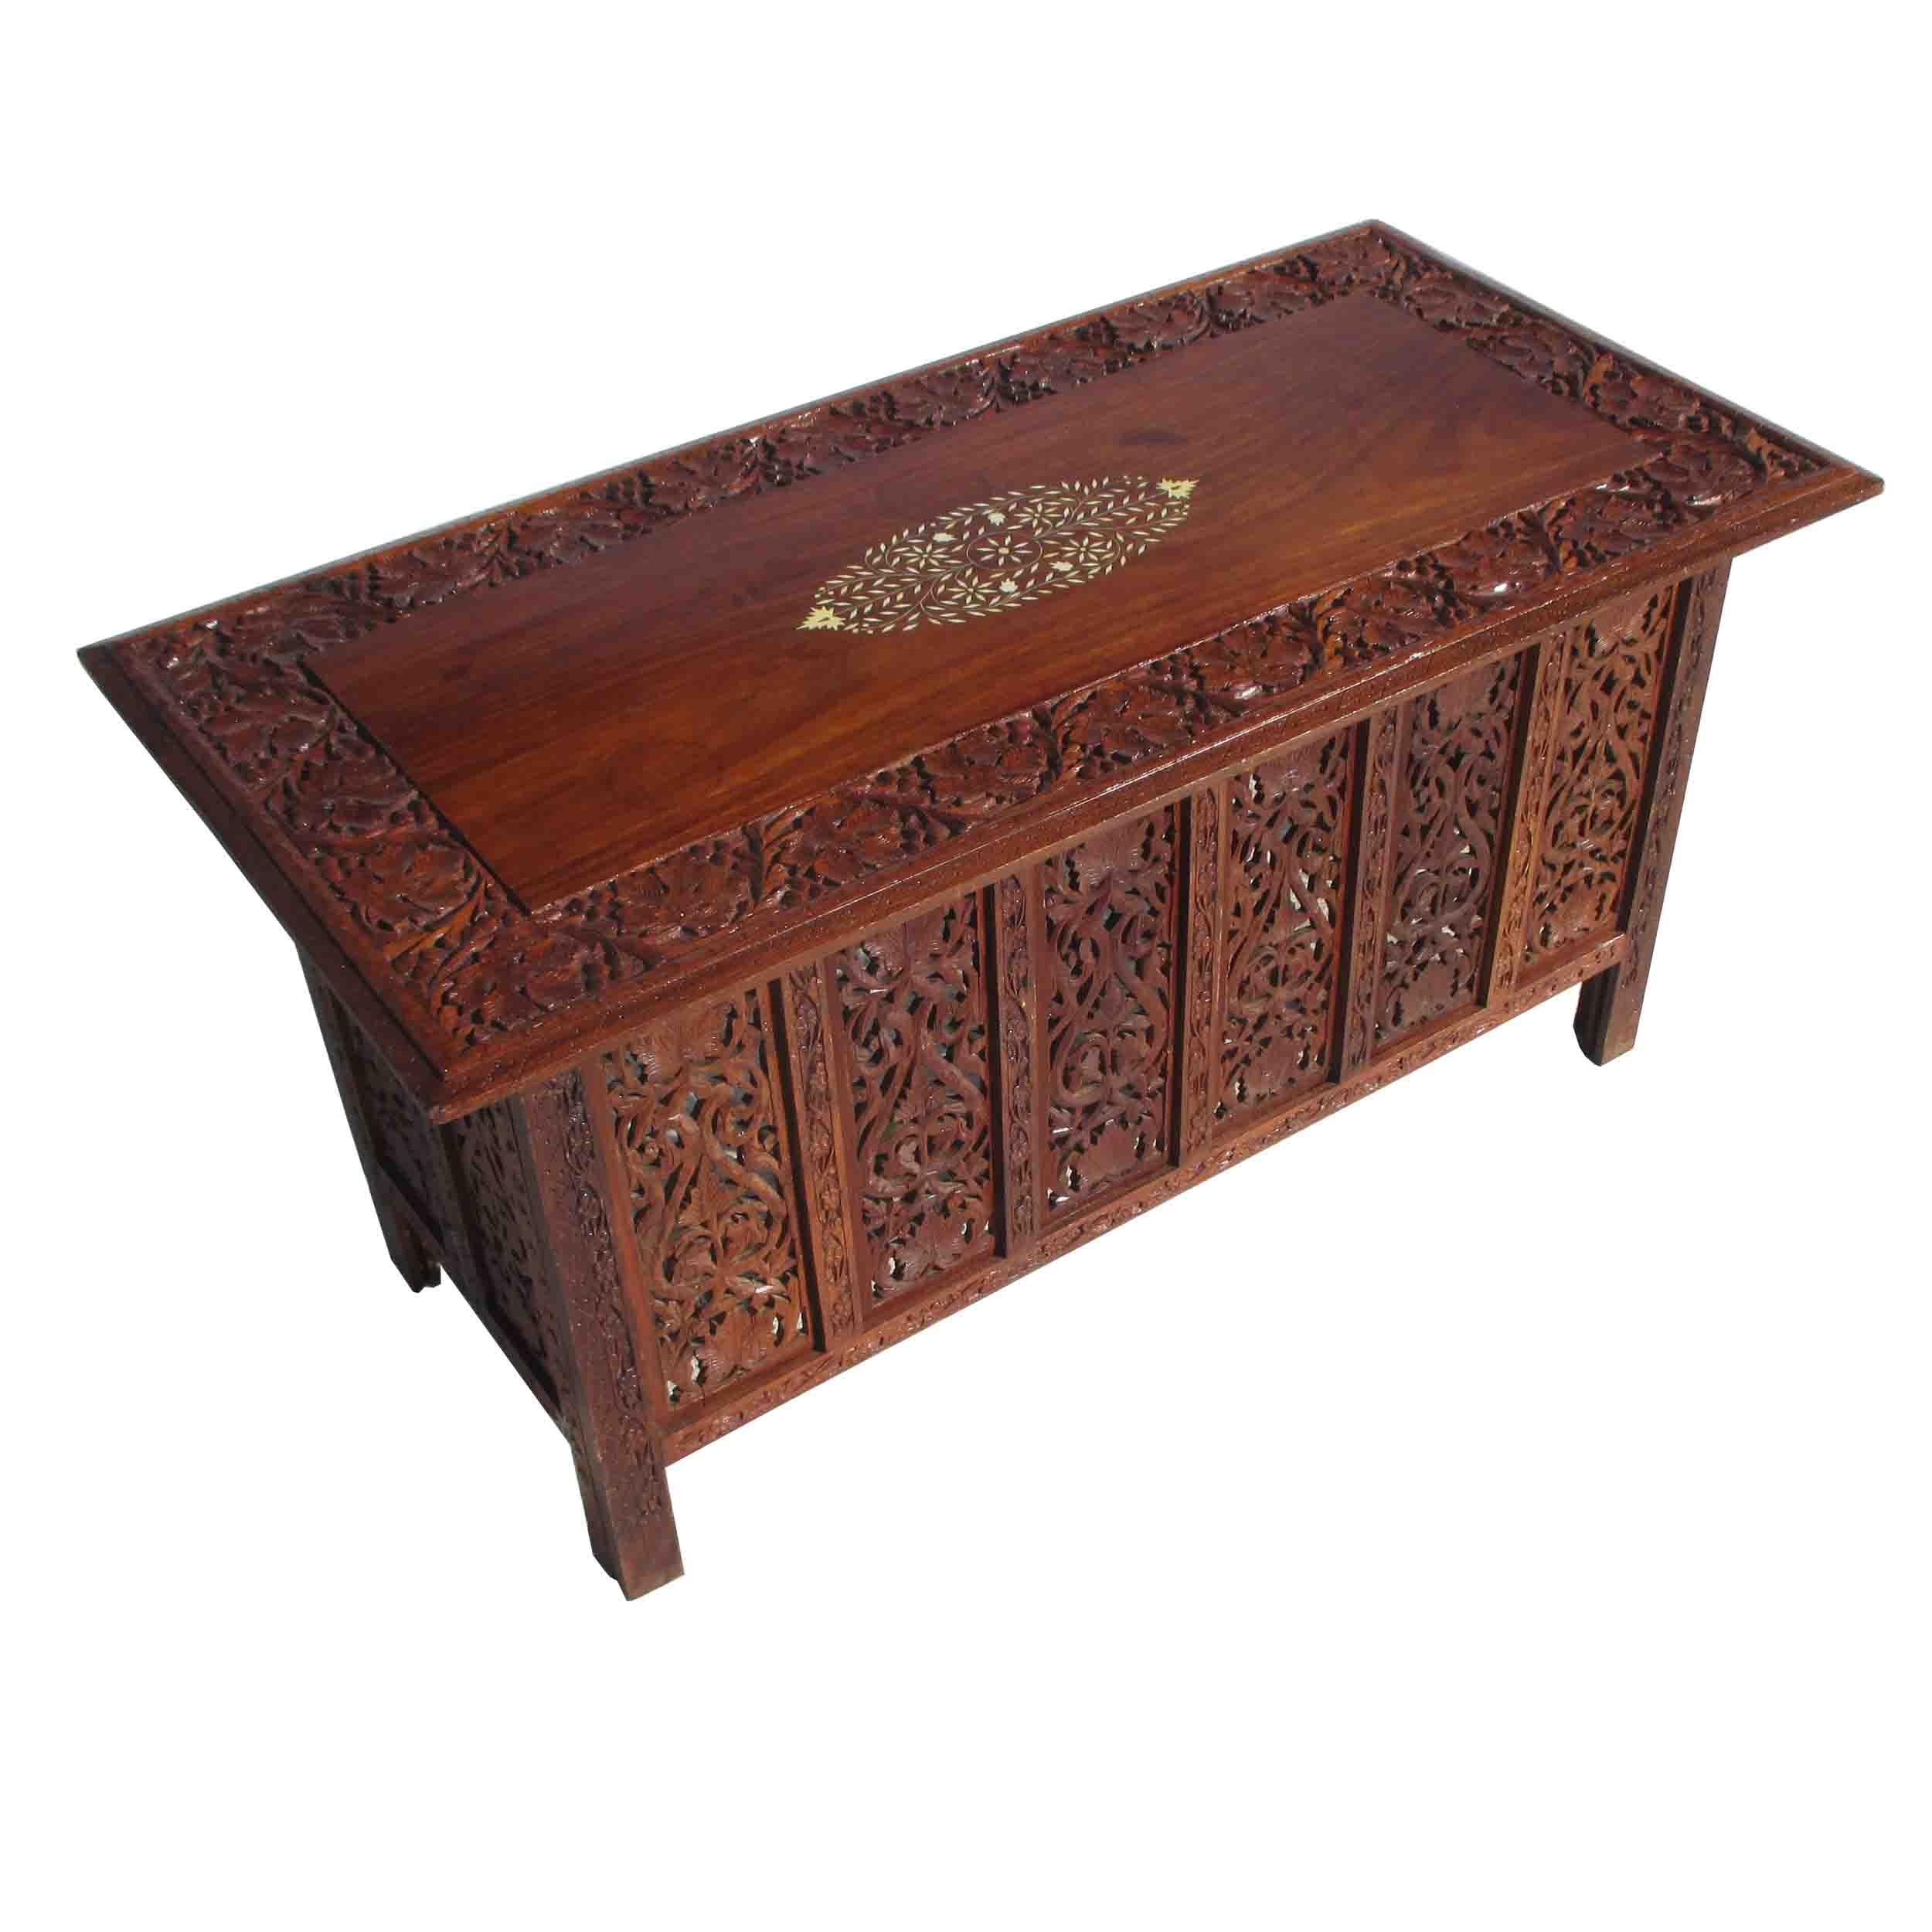 Indonesian fret work alter console table

Intricately carved teak table that folds down for portability. Mother of pearl inlay on table top.

Measures: 36